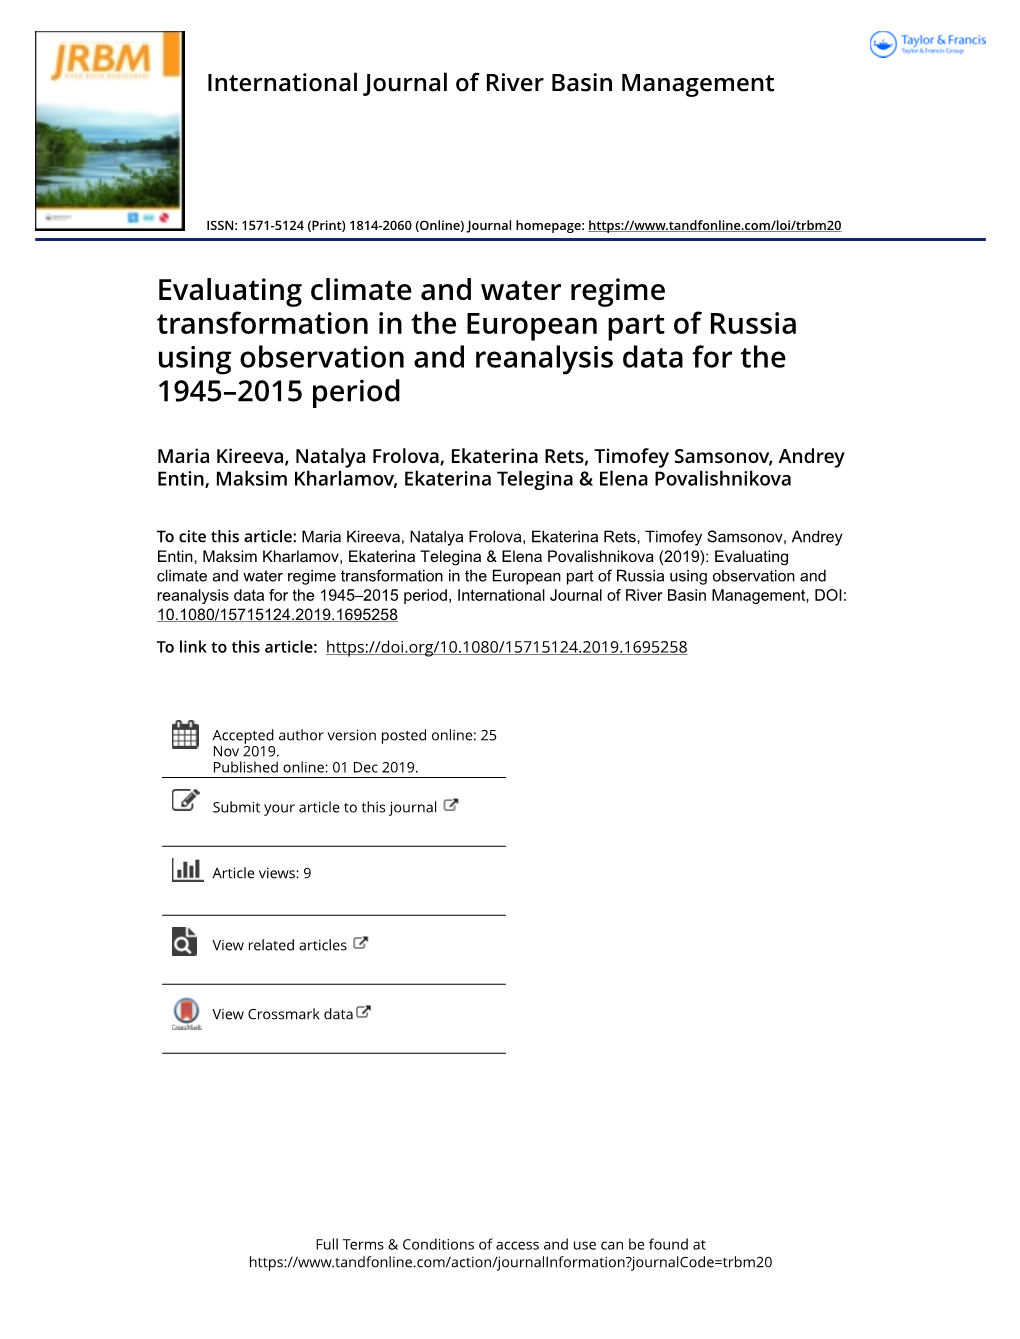 Evaluating Climate and Water Regime Transformation in the European Part of Russia Using Observation and Reanalysis Data for the 1945–2015 Period